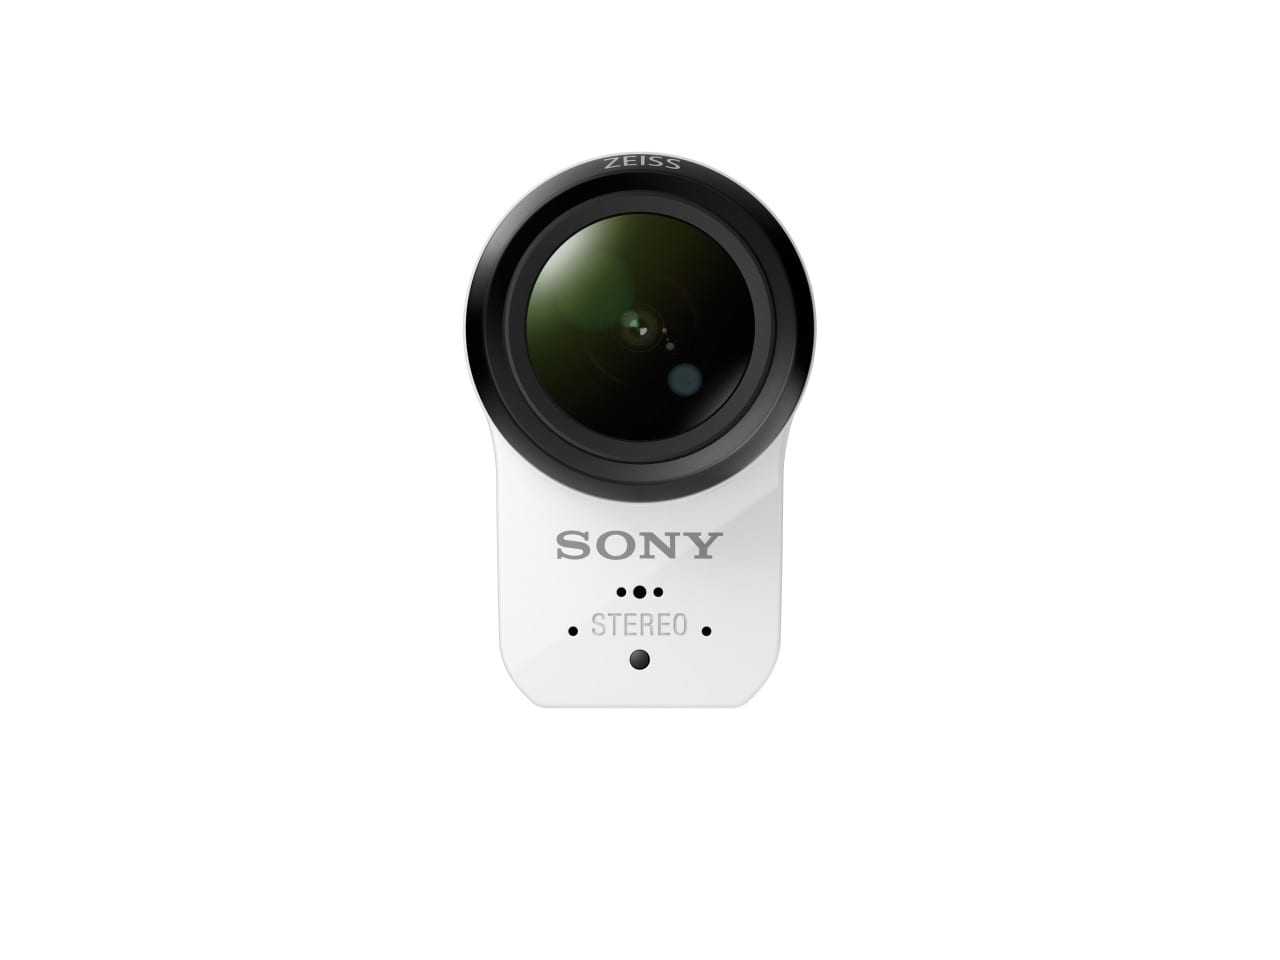 iFA 2016 – Sony FDR-X3000R Hi End Action Cam